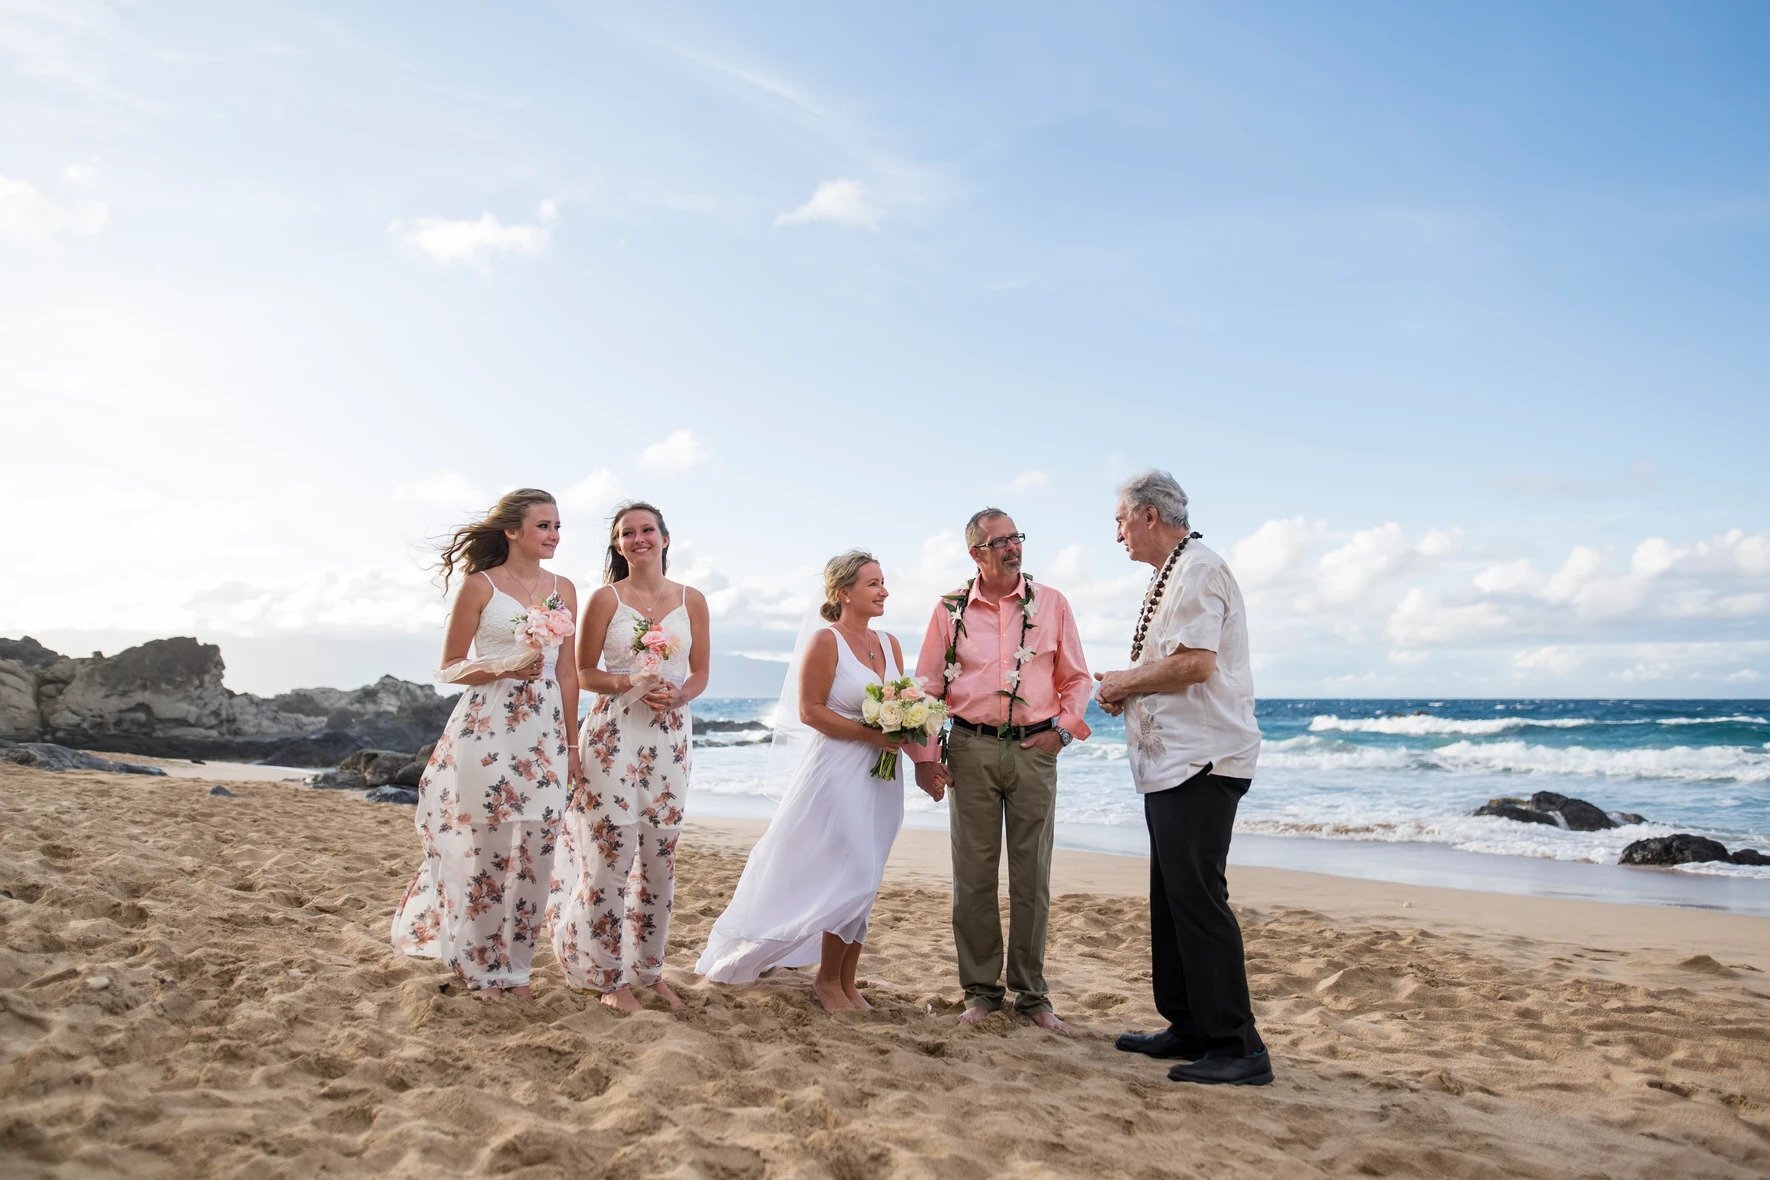 vow renewal on a beach in Maui